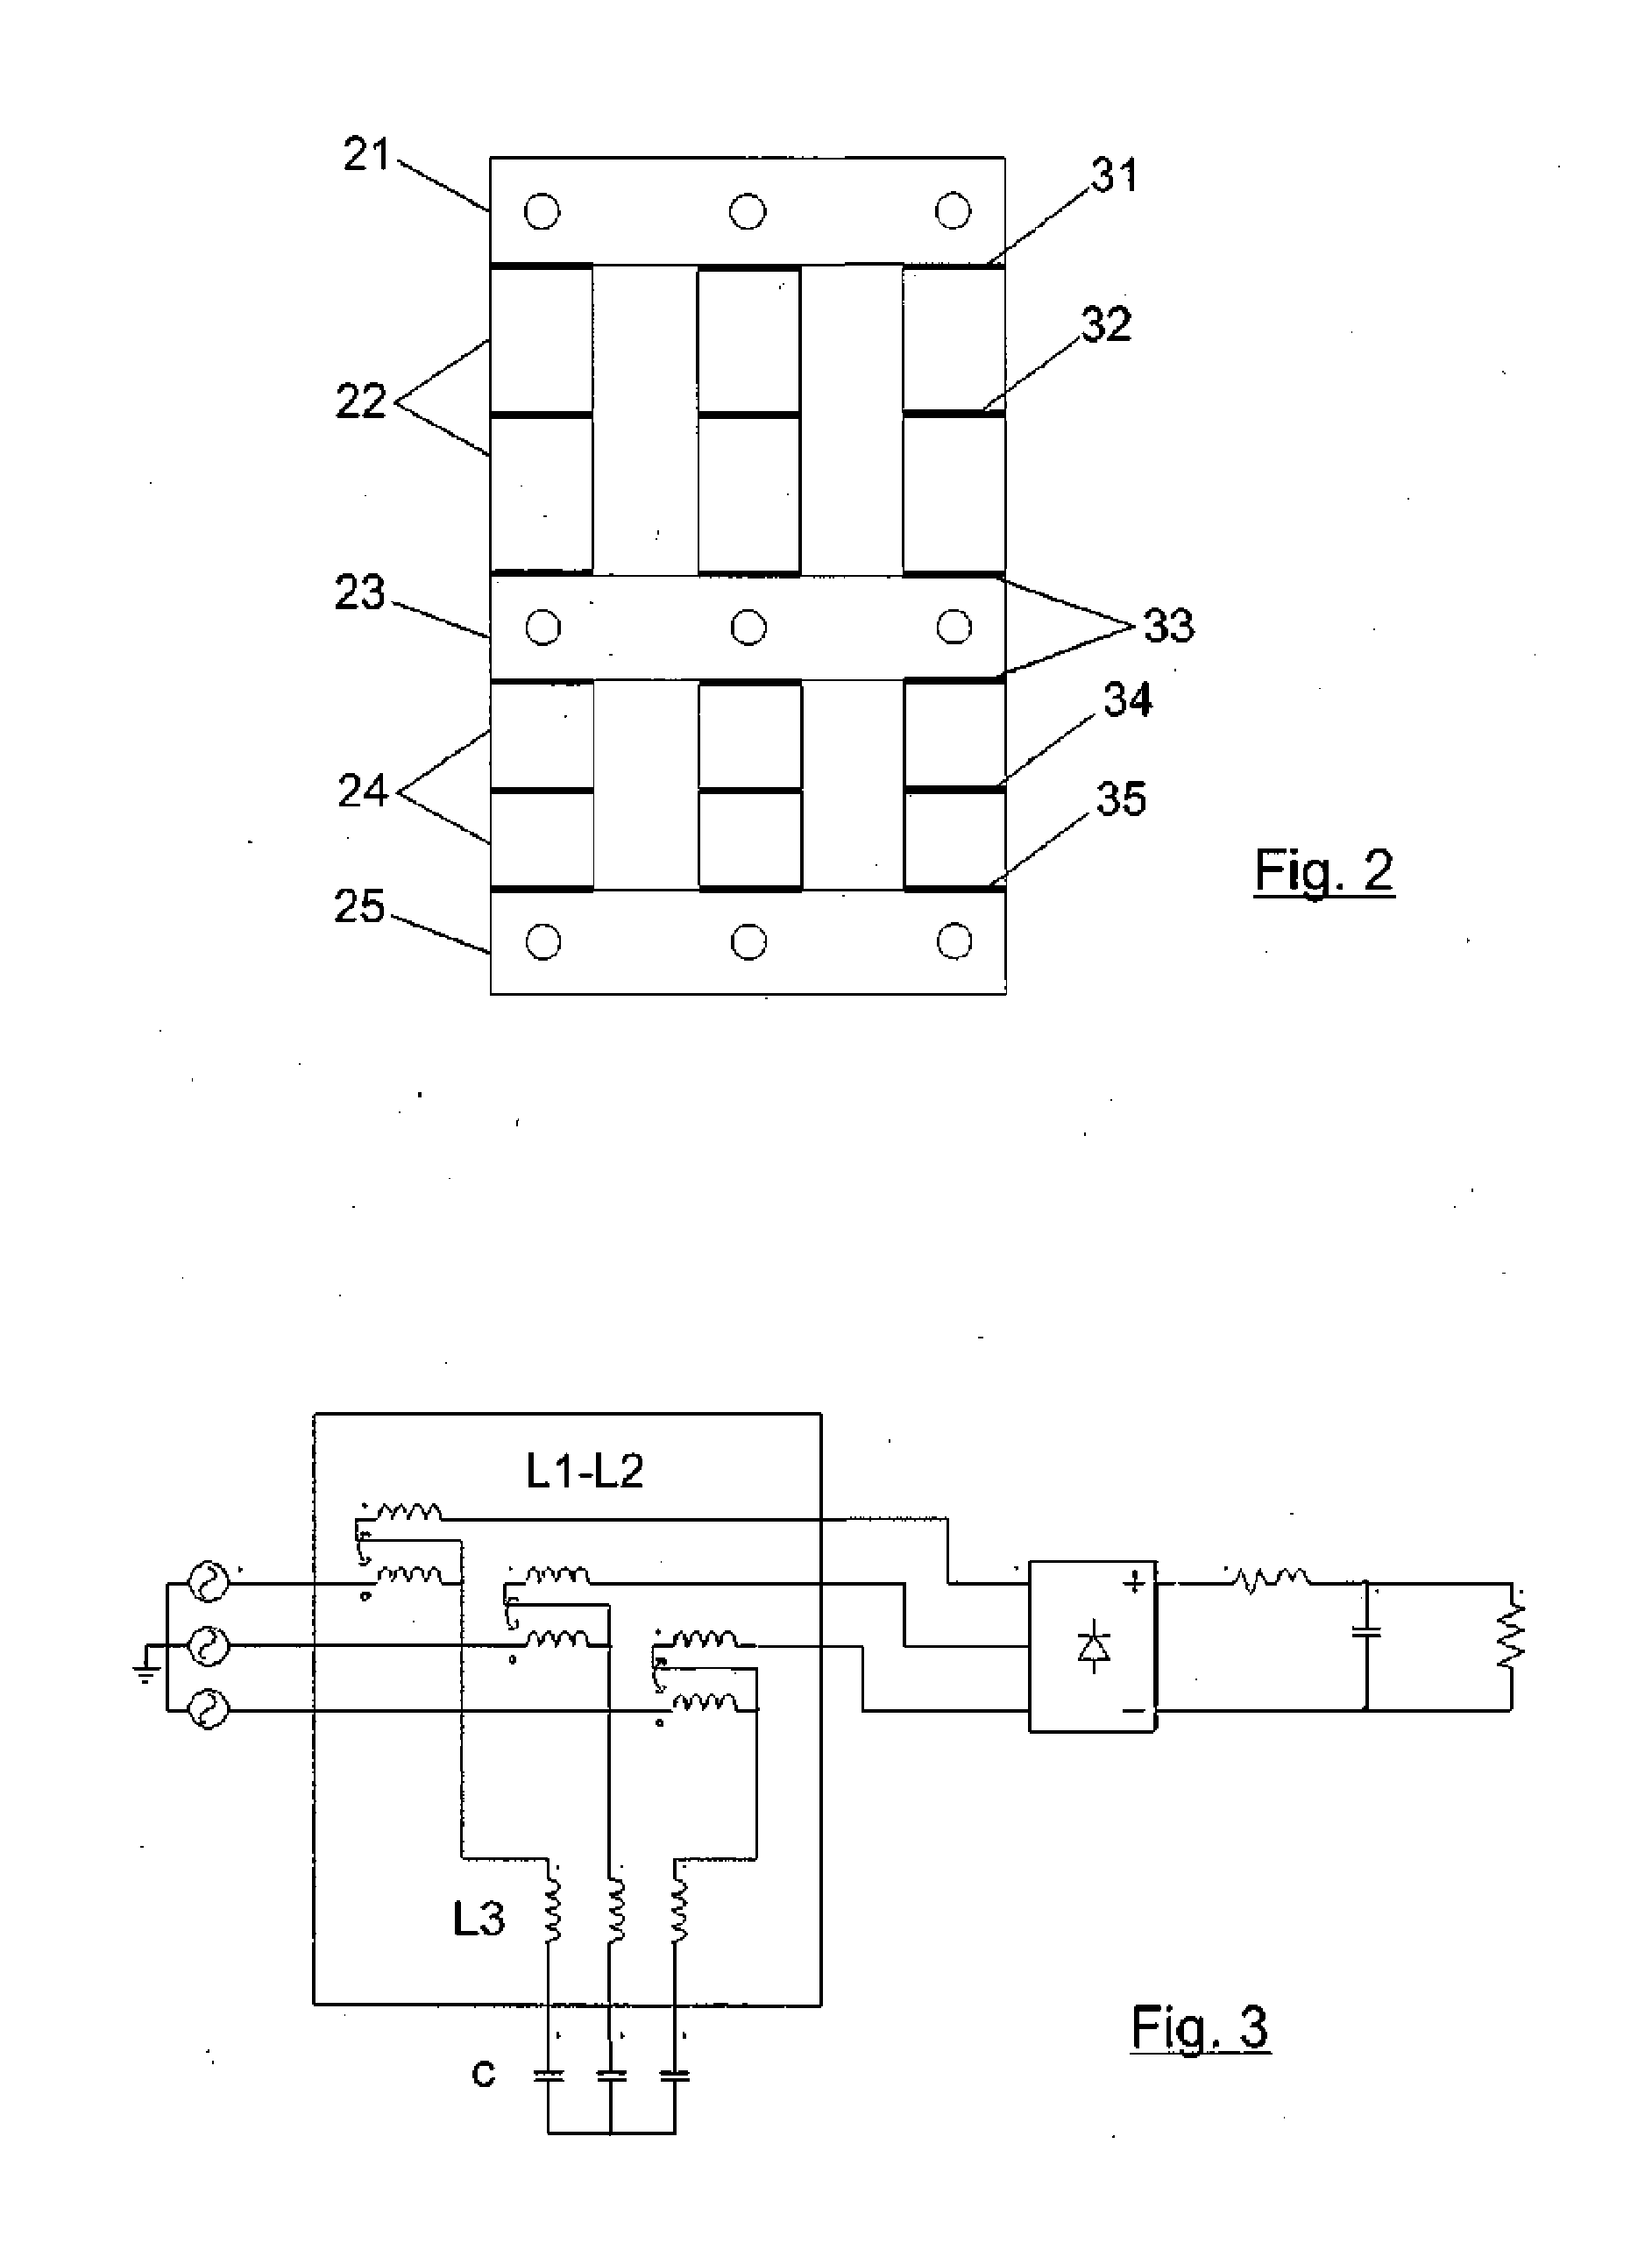 Single-core self-coupled inductor device